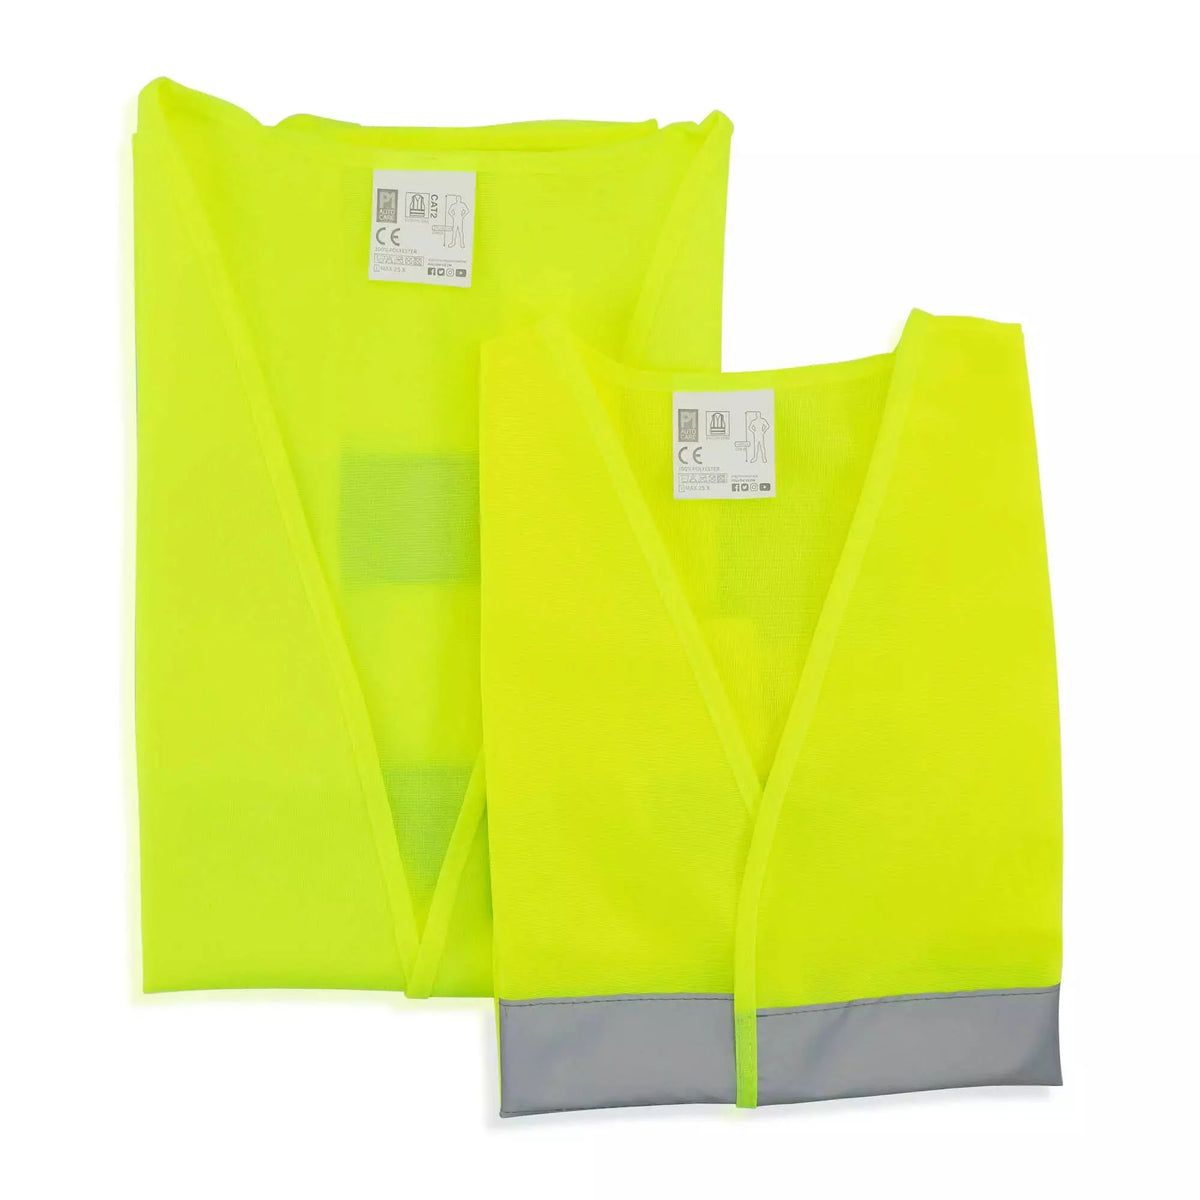 Adult High Visibility Safety Vest (Twin Pack) - Green Flag vGroup